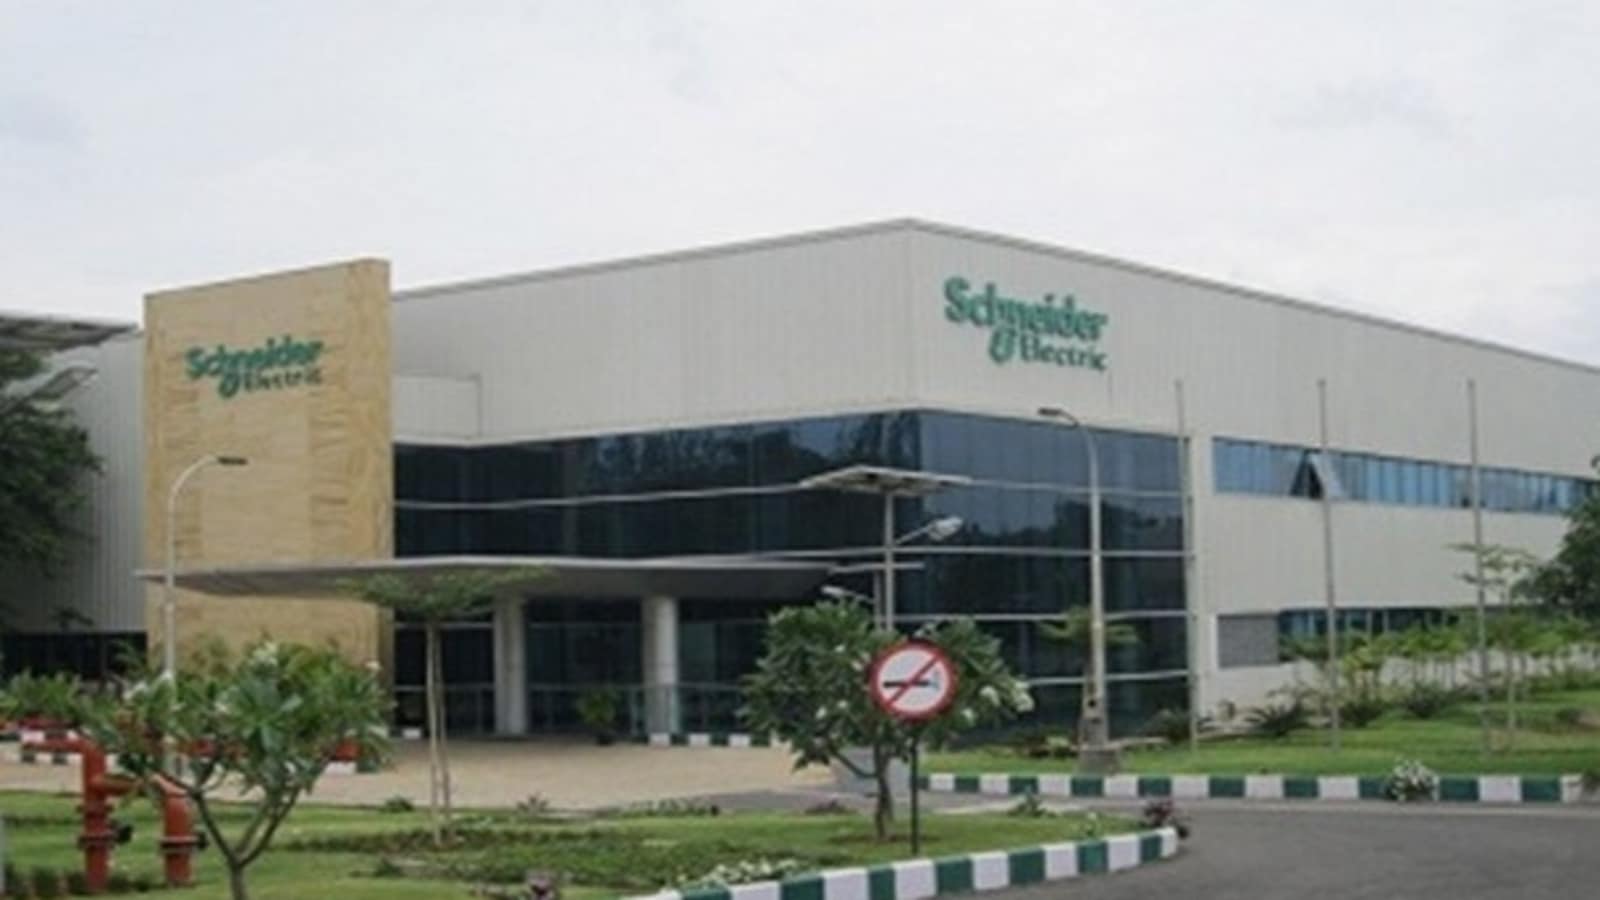 Schneider Electric to invest ₹425 crore for smart factory in Bengaluru